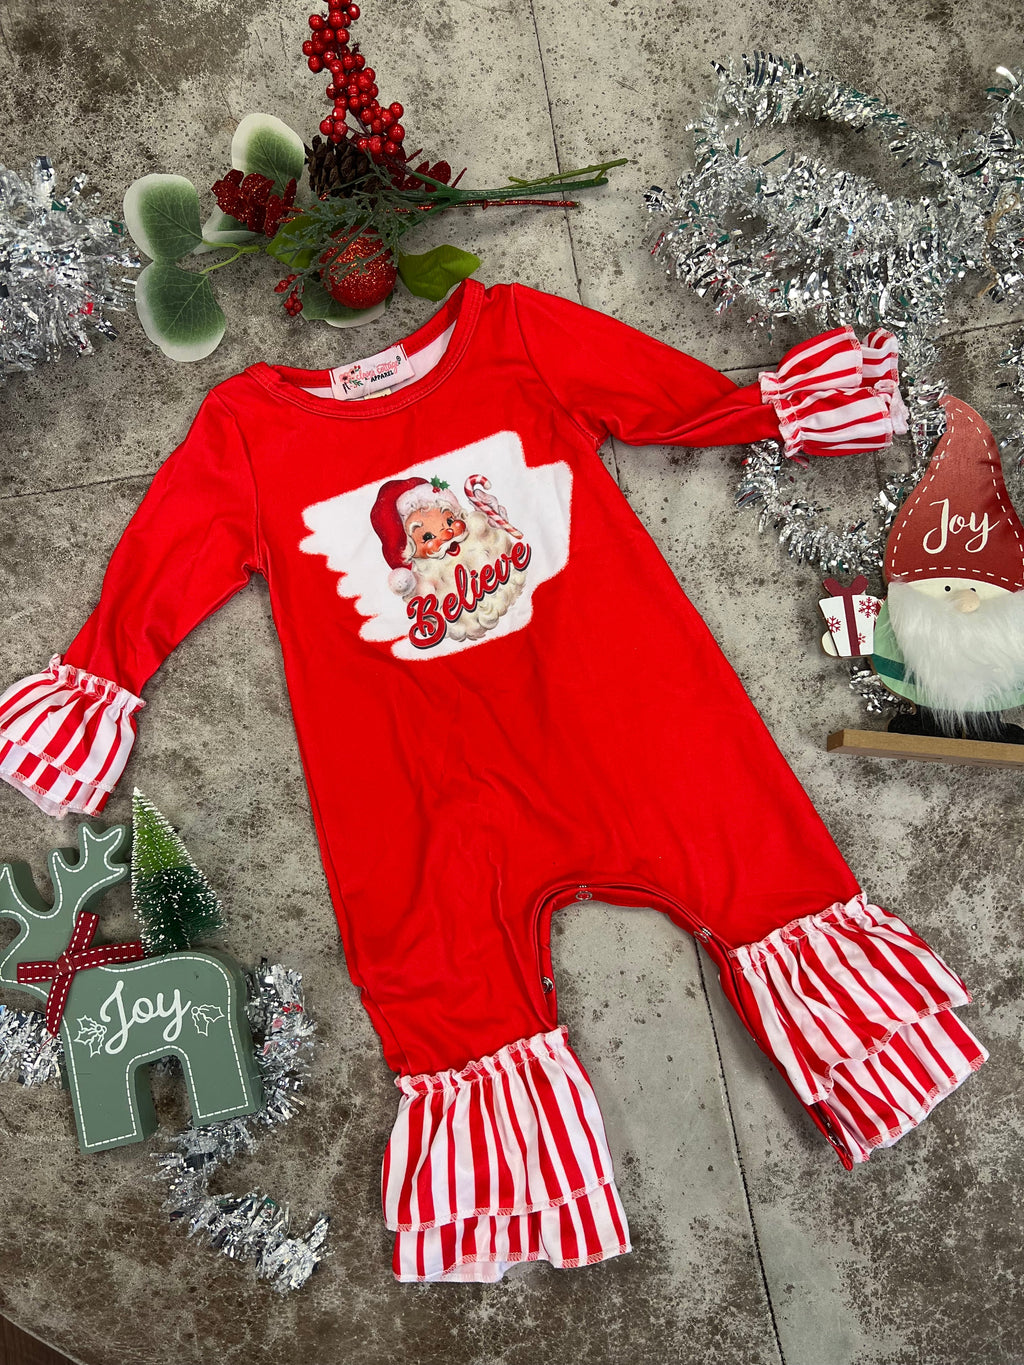 Your lil’ one will look as cute as Santa’s list in this KIDS Peppermint Believe Jumper. Crafted from butter-soft 95% cotton and 5% spandex, this red romper features a white and red striped ruffled hem and a snap bottom closure for easy changing. Plus, the festive Santa Claus “Believe” graphic is sure to get their spirits soaring!